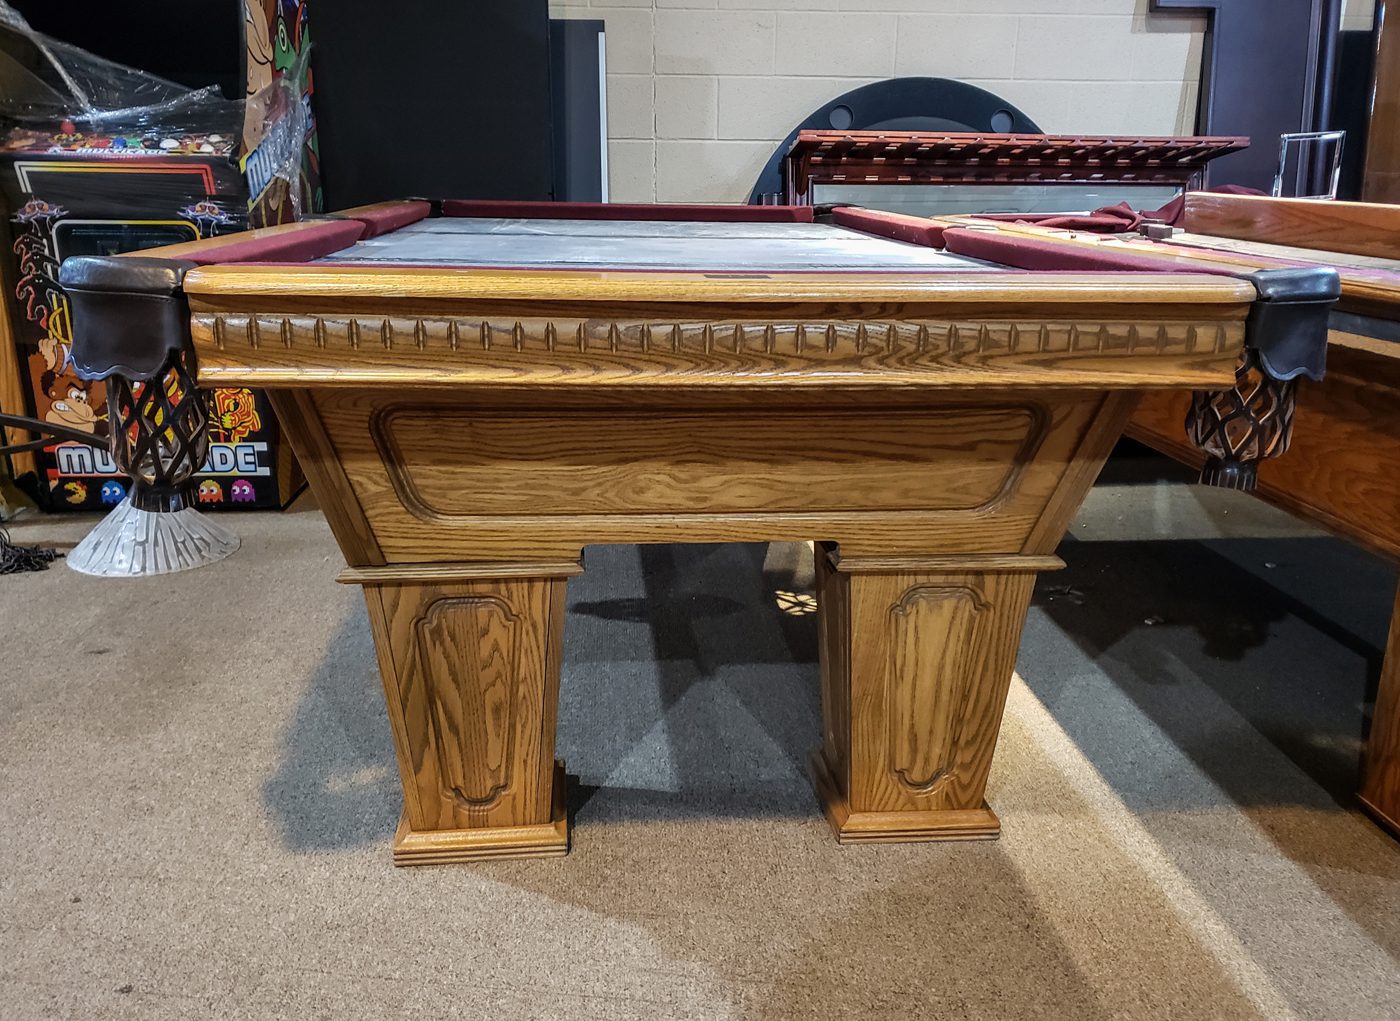 Used Pool Table For Sale 8 Foot Kasson Free Delivery Hatfield